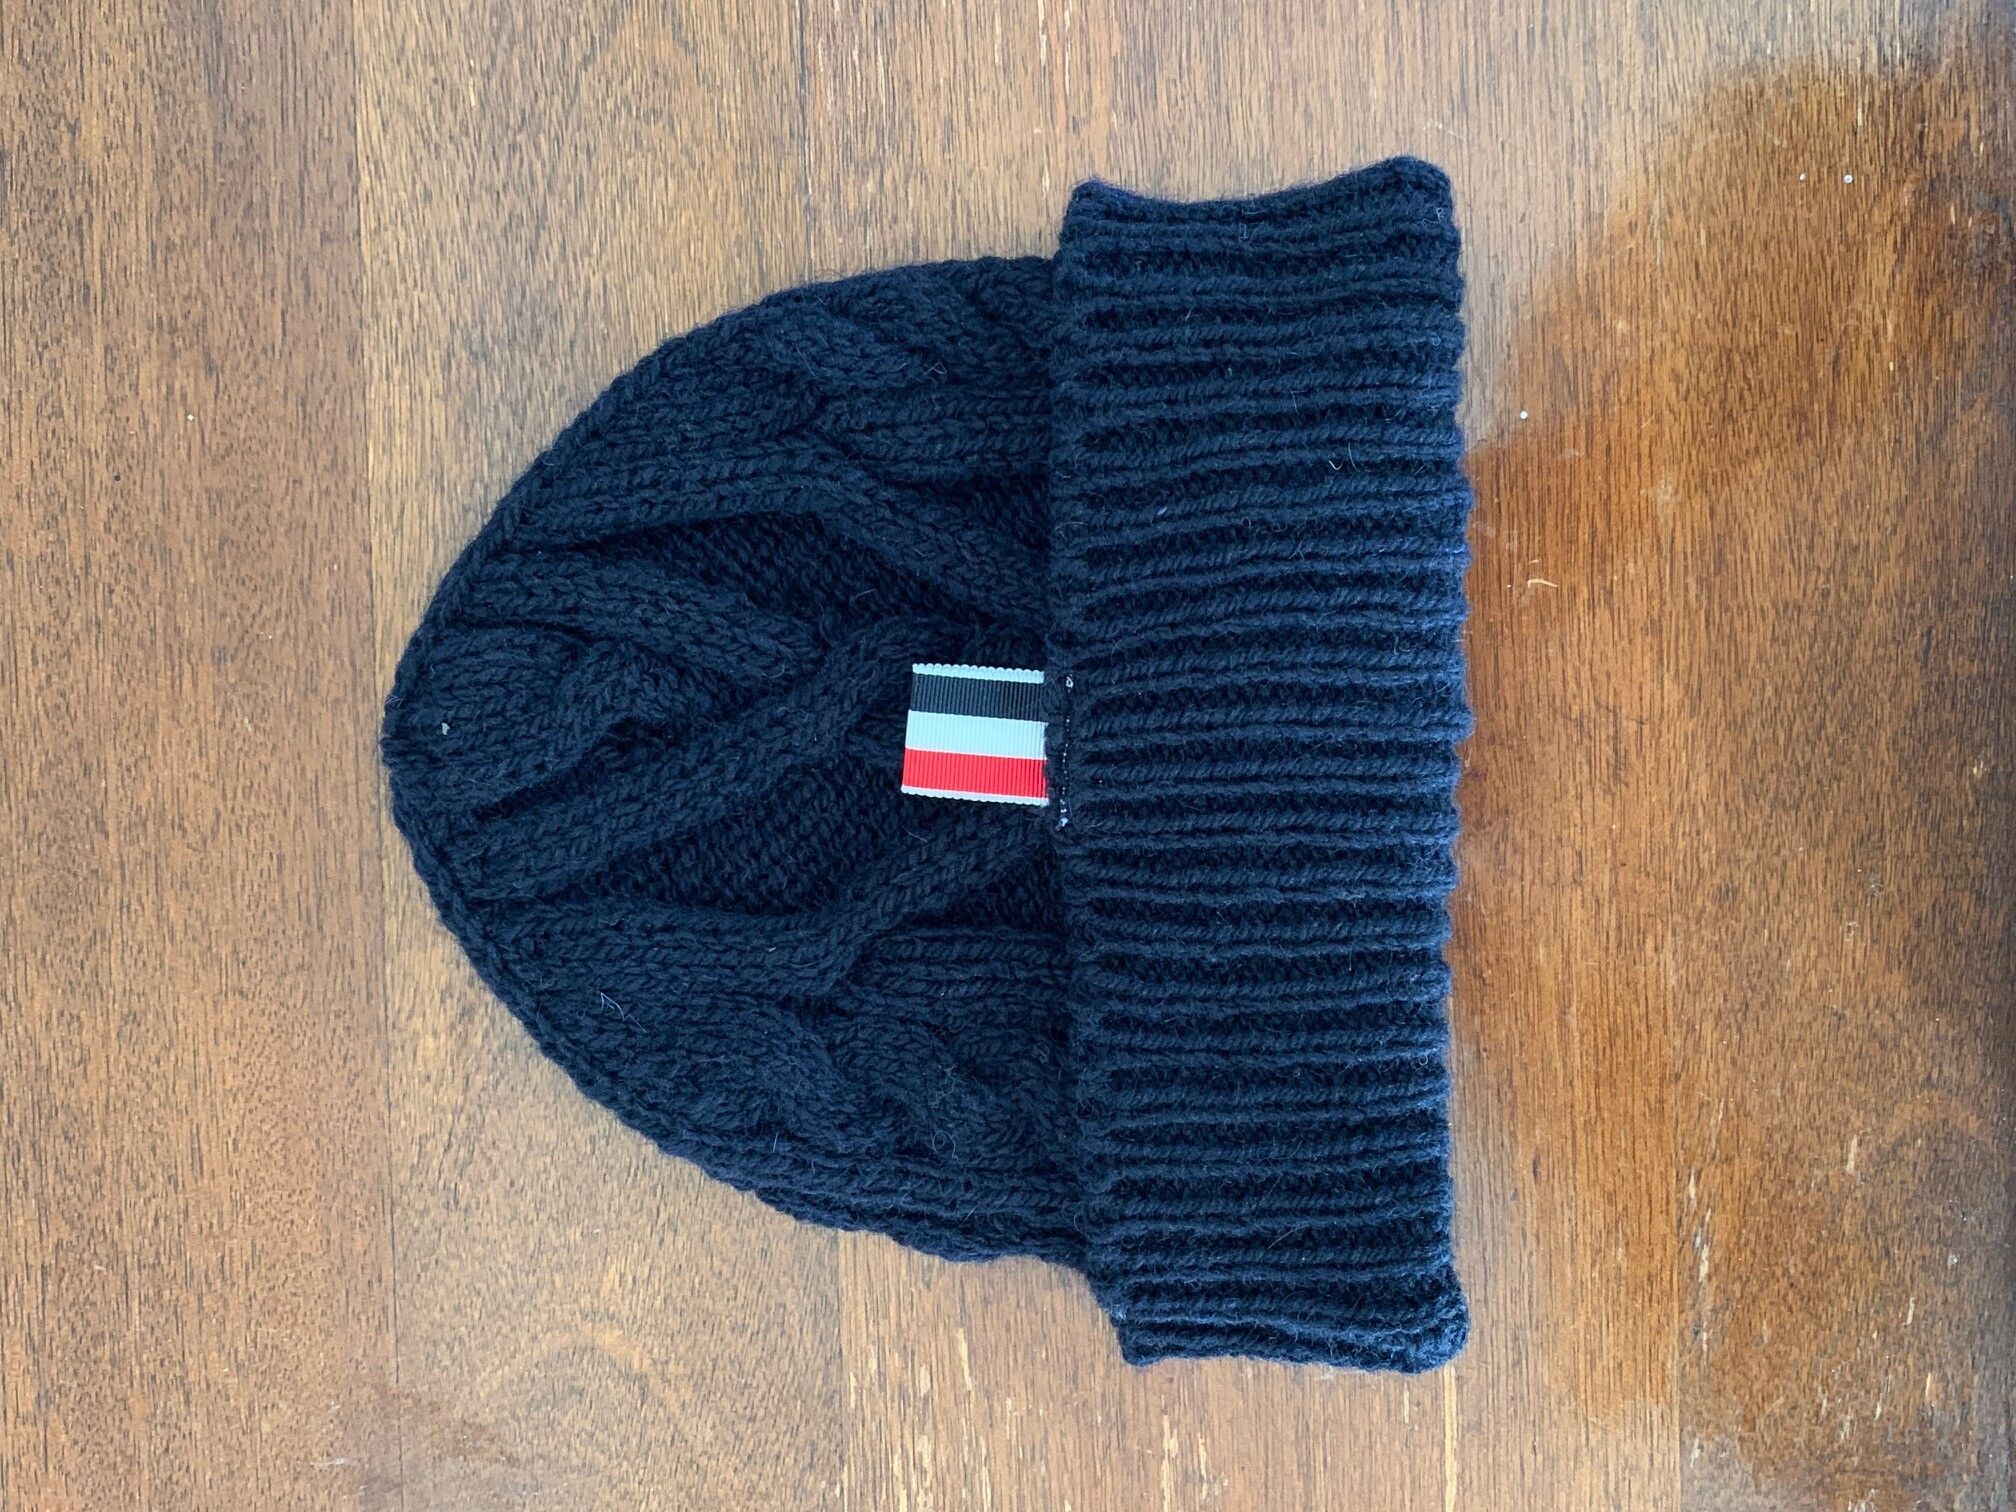 Thom Browne Thom Browne Aran Cable Donegal Knit Hat Navy | Grailed